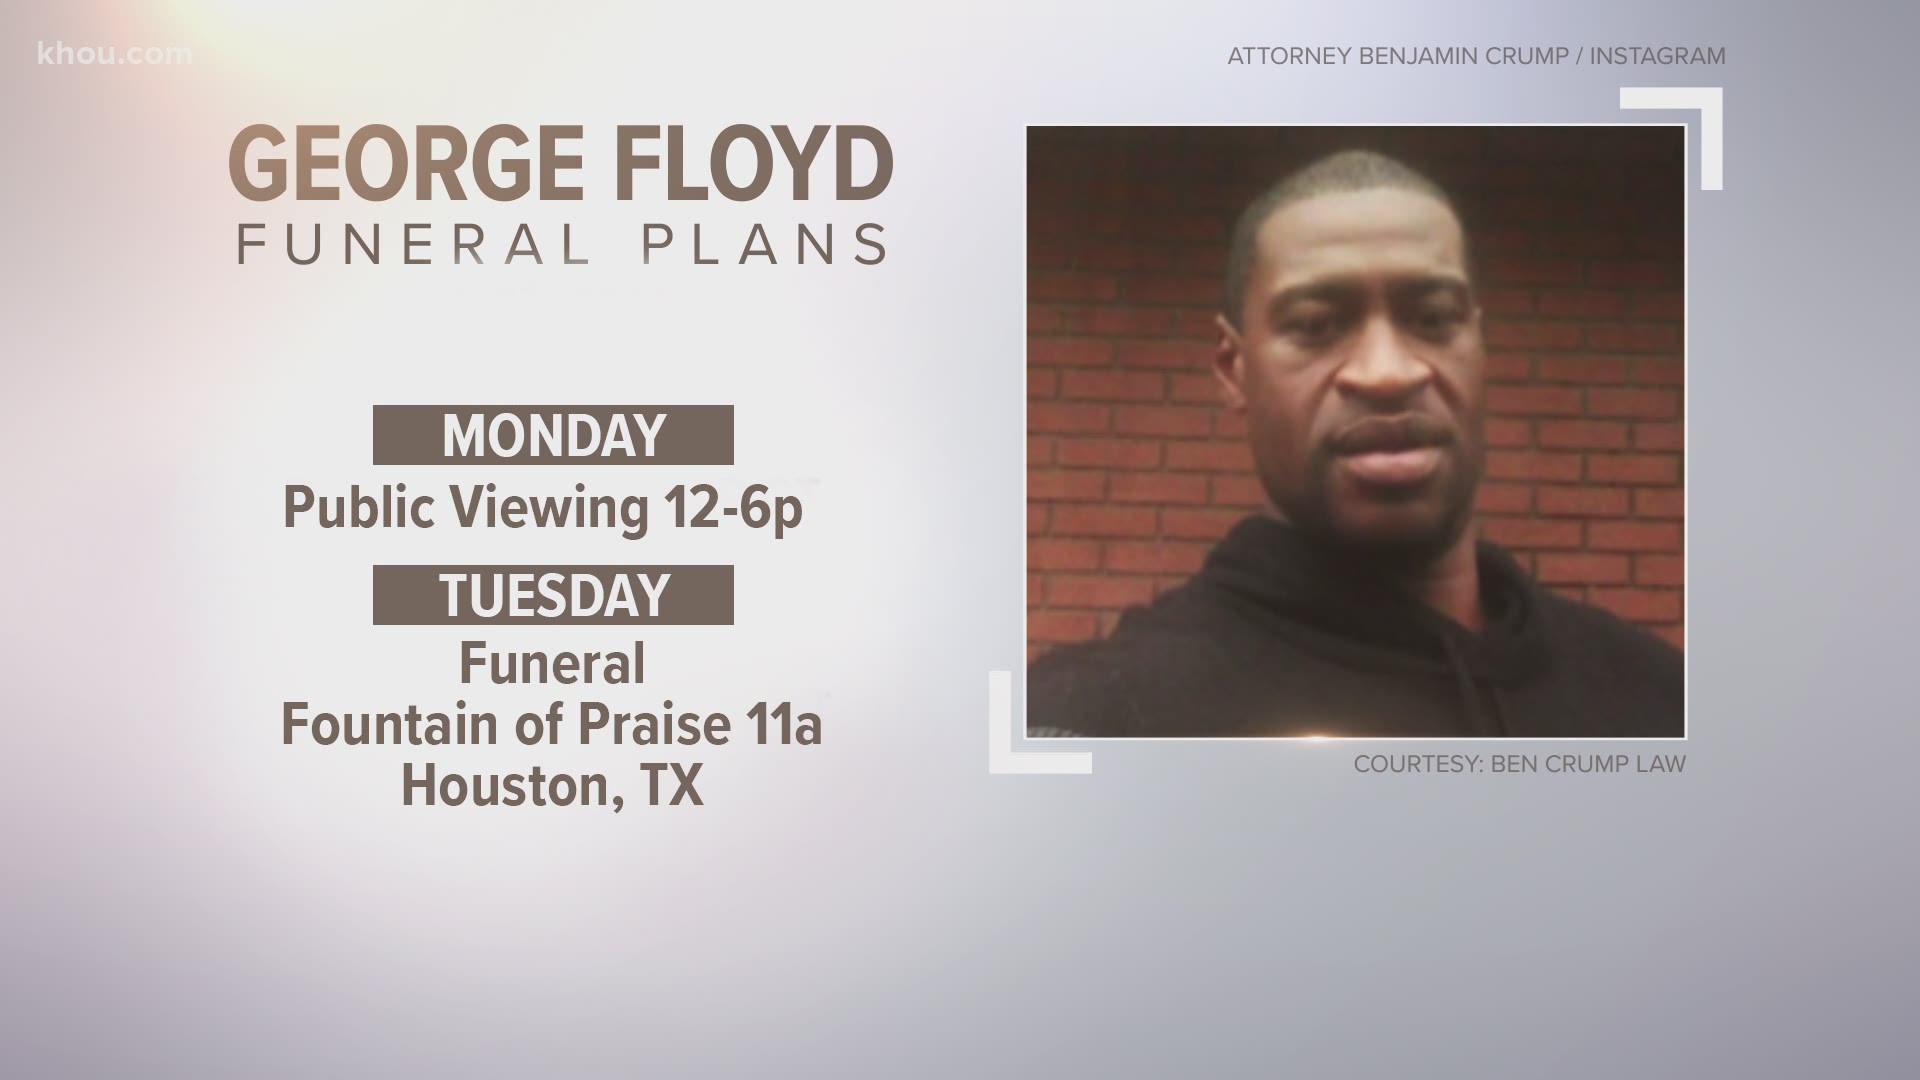 There will be a public viewing Monday and a funeral service Tuesday.